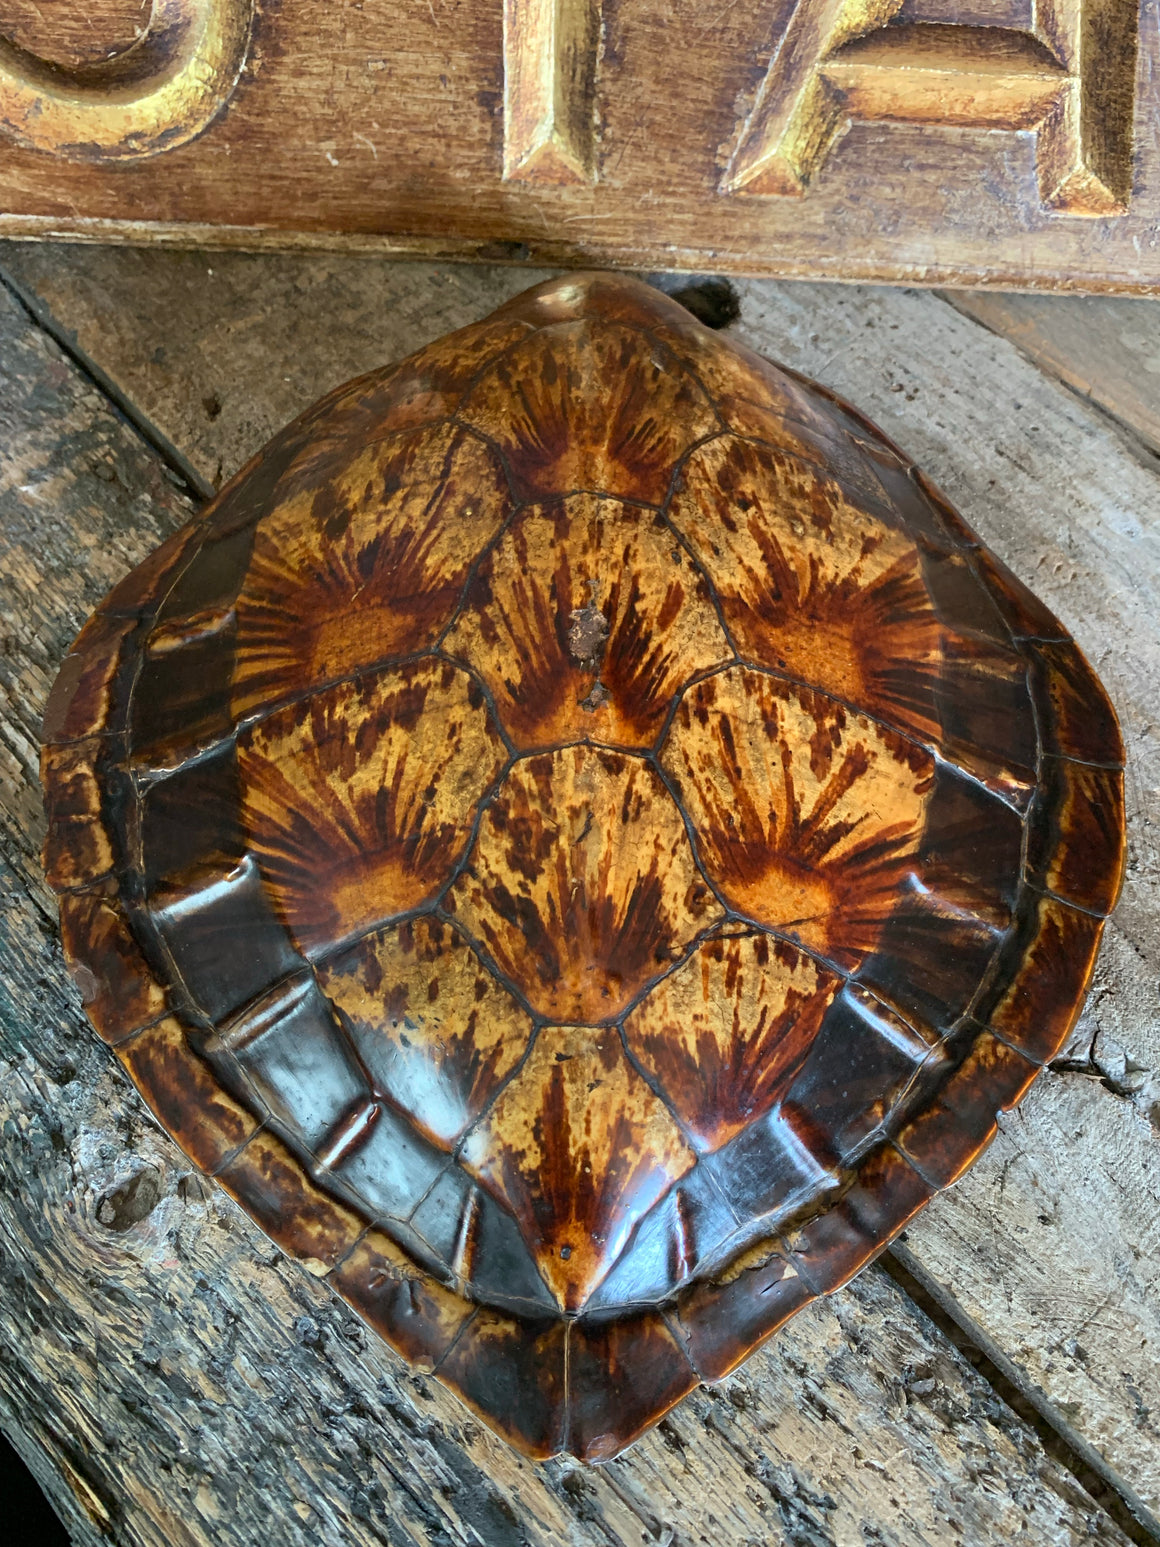 An antique taxidermy turtle shell specimen